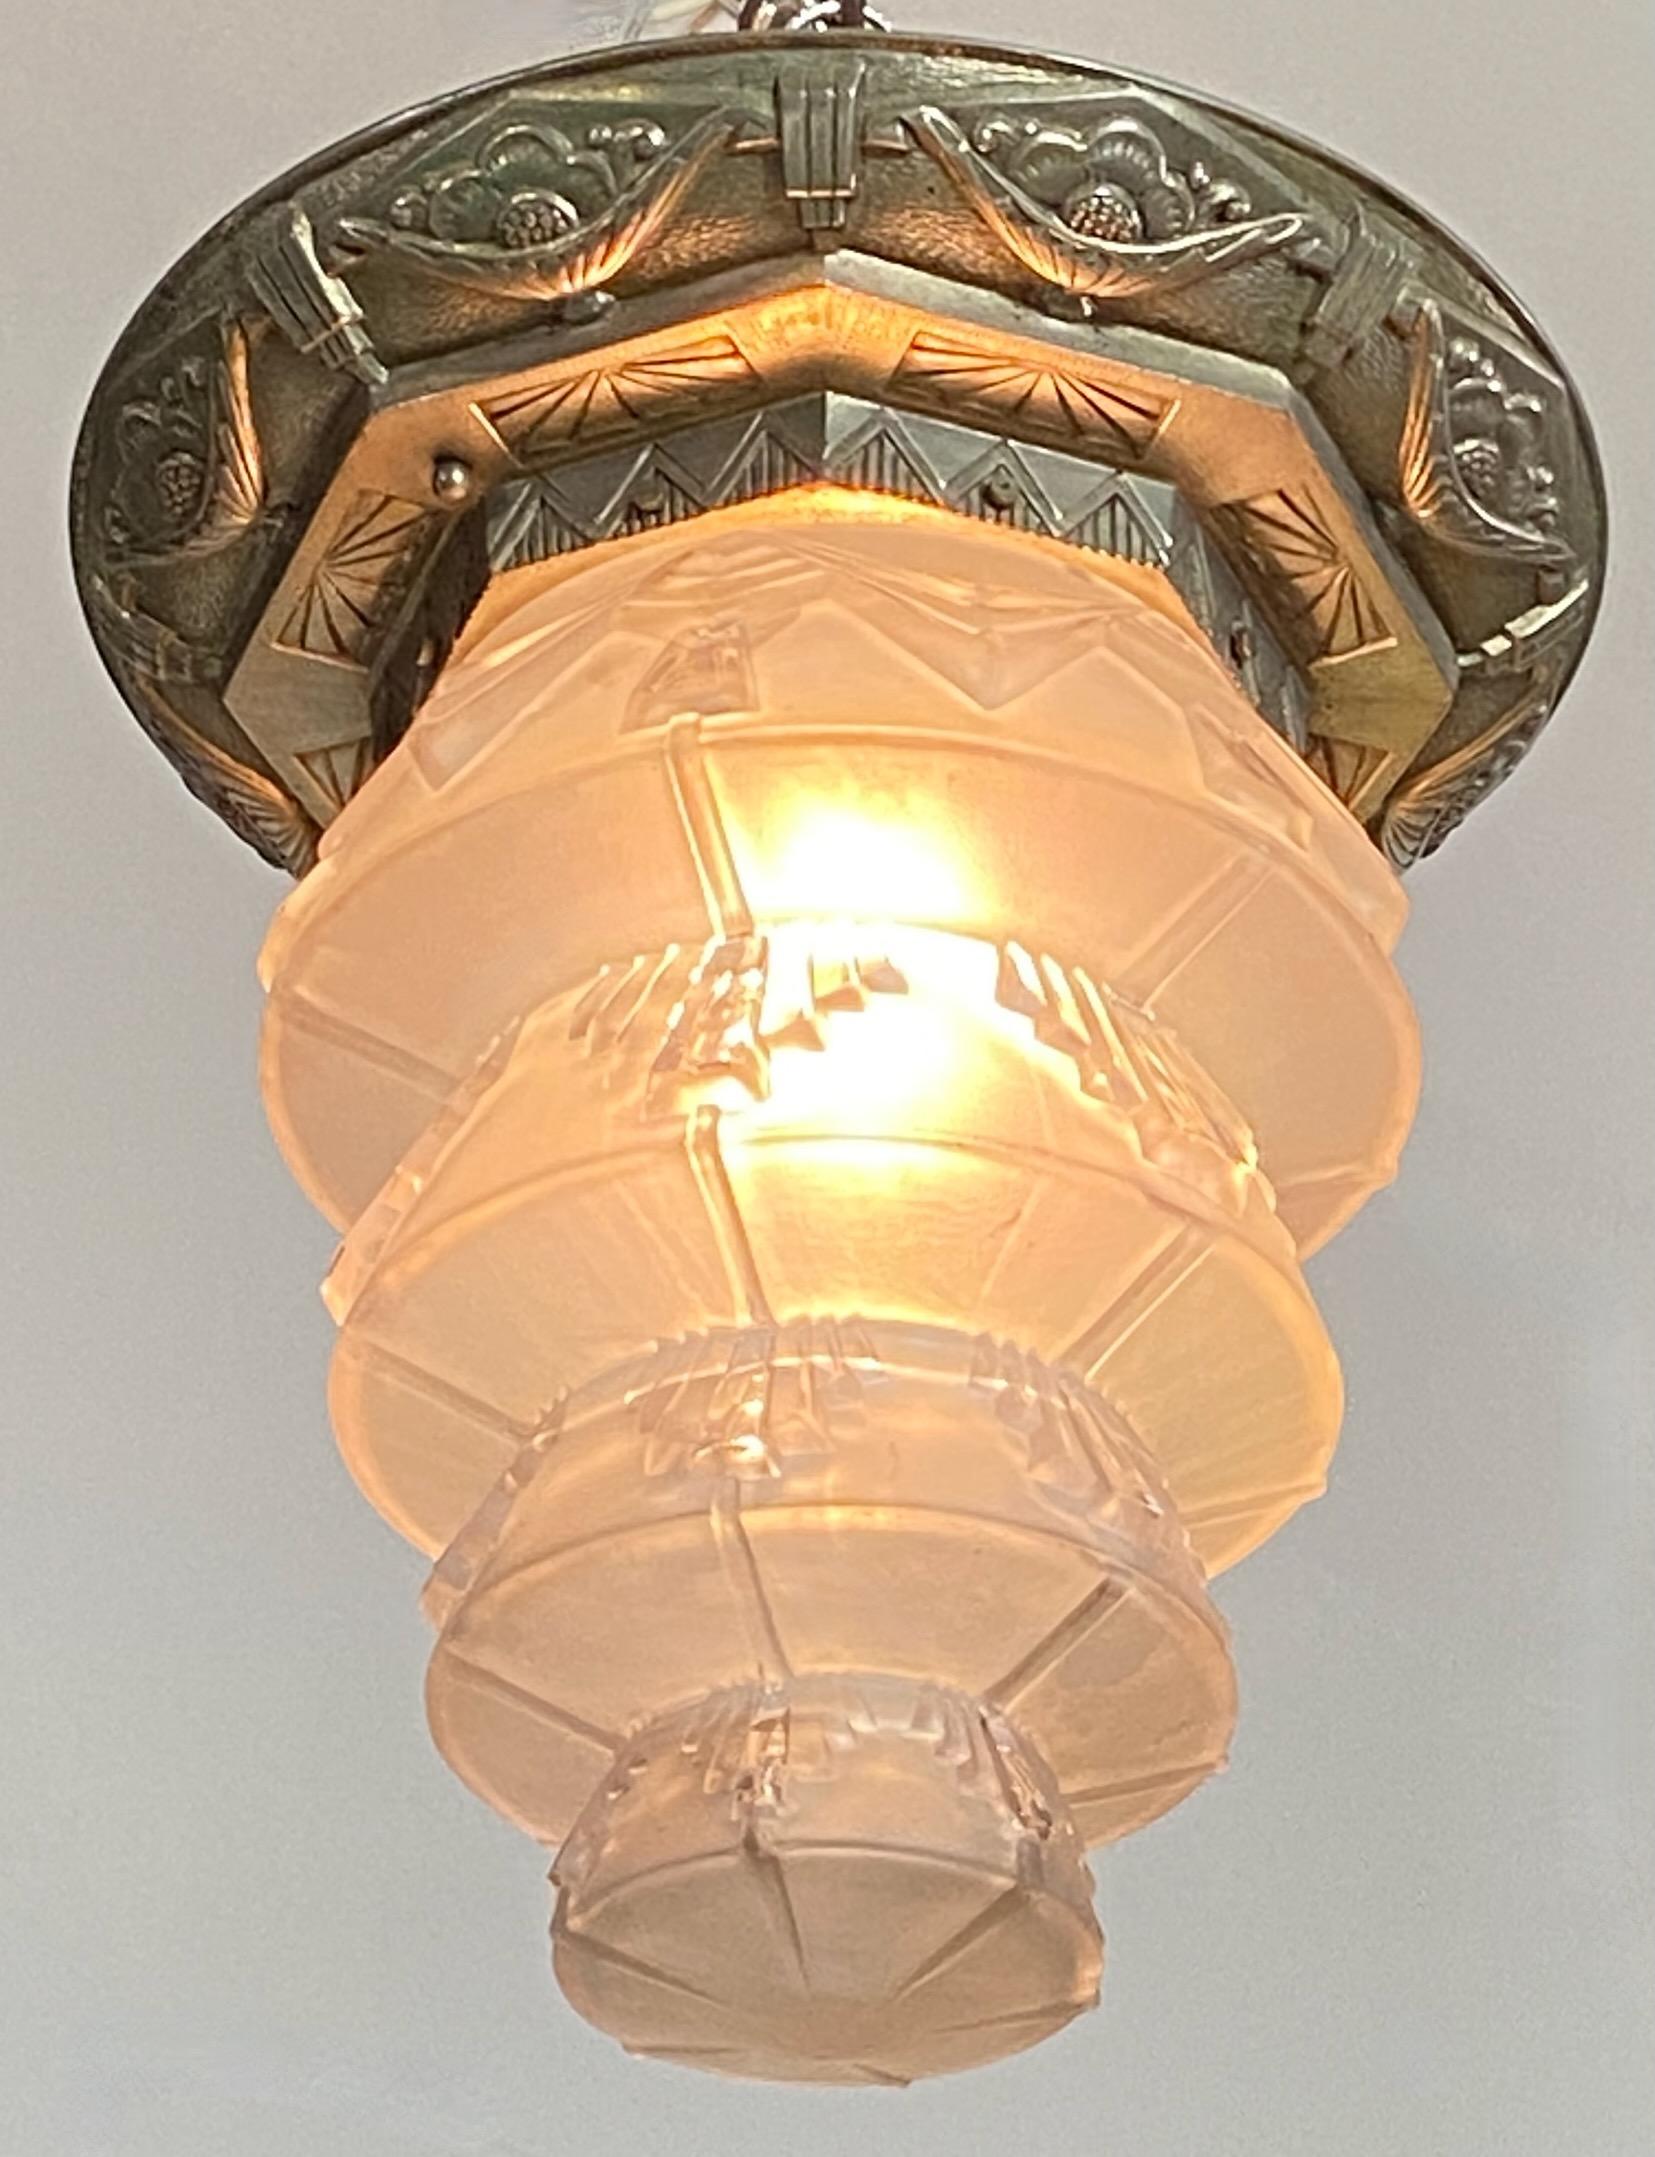 1920's French Art Deco Flush Mount Pendant Light Fixture In Good Condition For Sale In San Francisco, CA